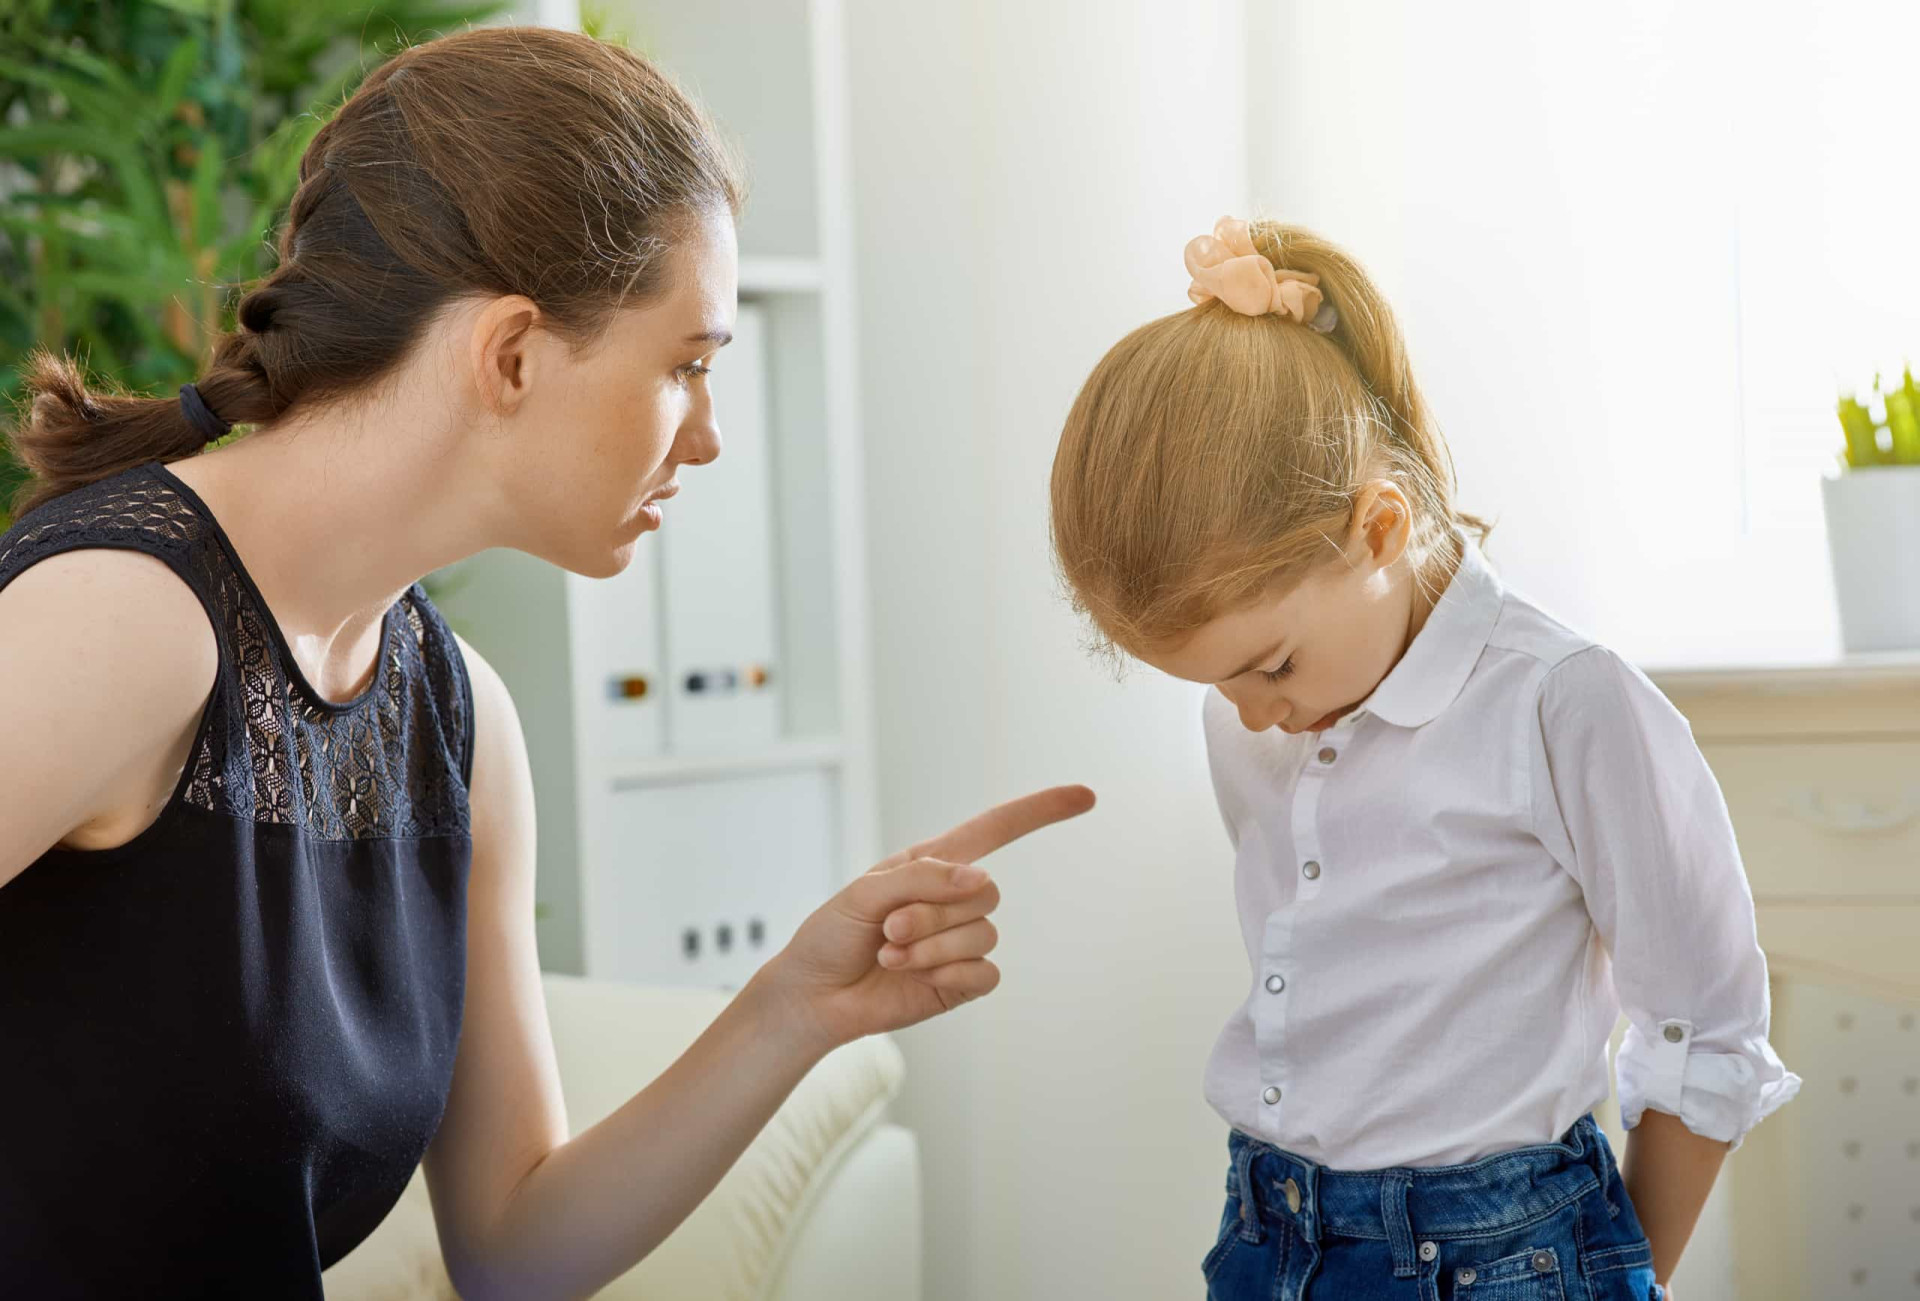 Parenting styles and how they affect children